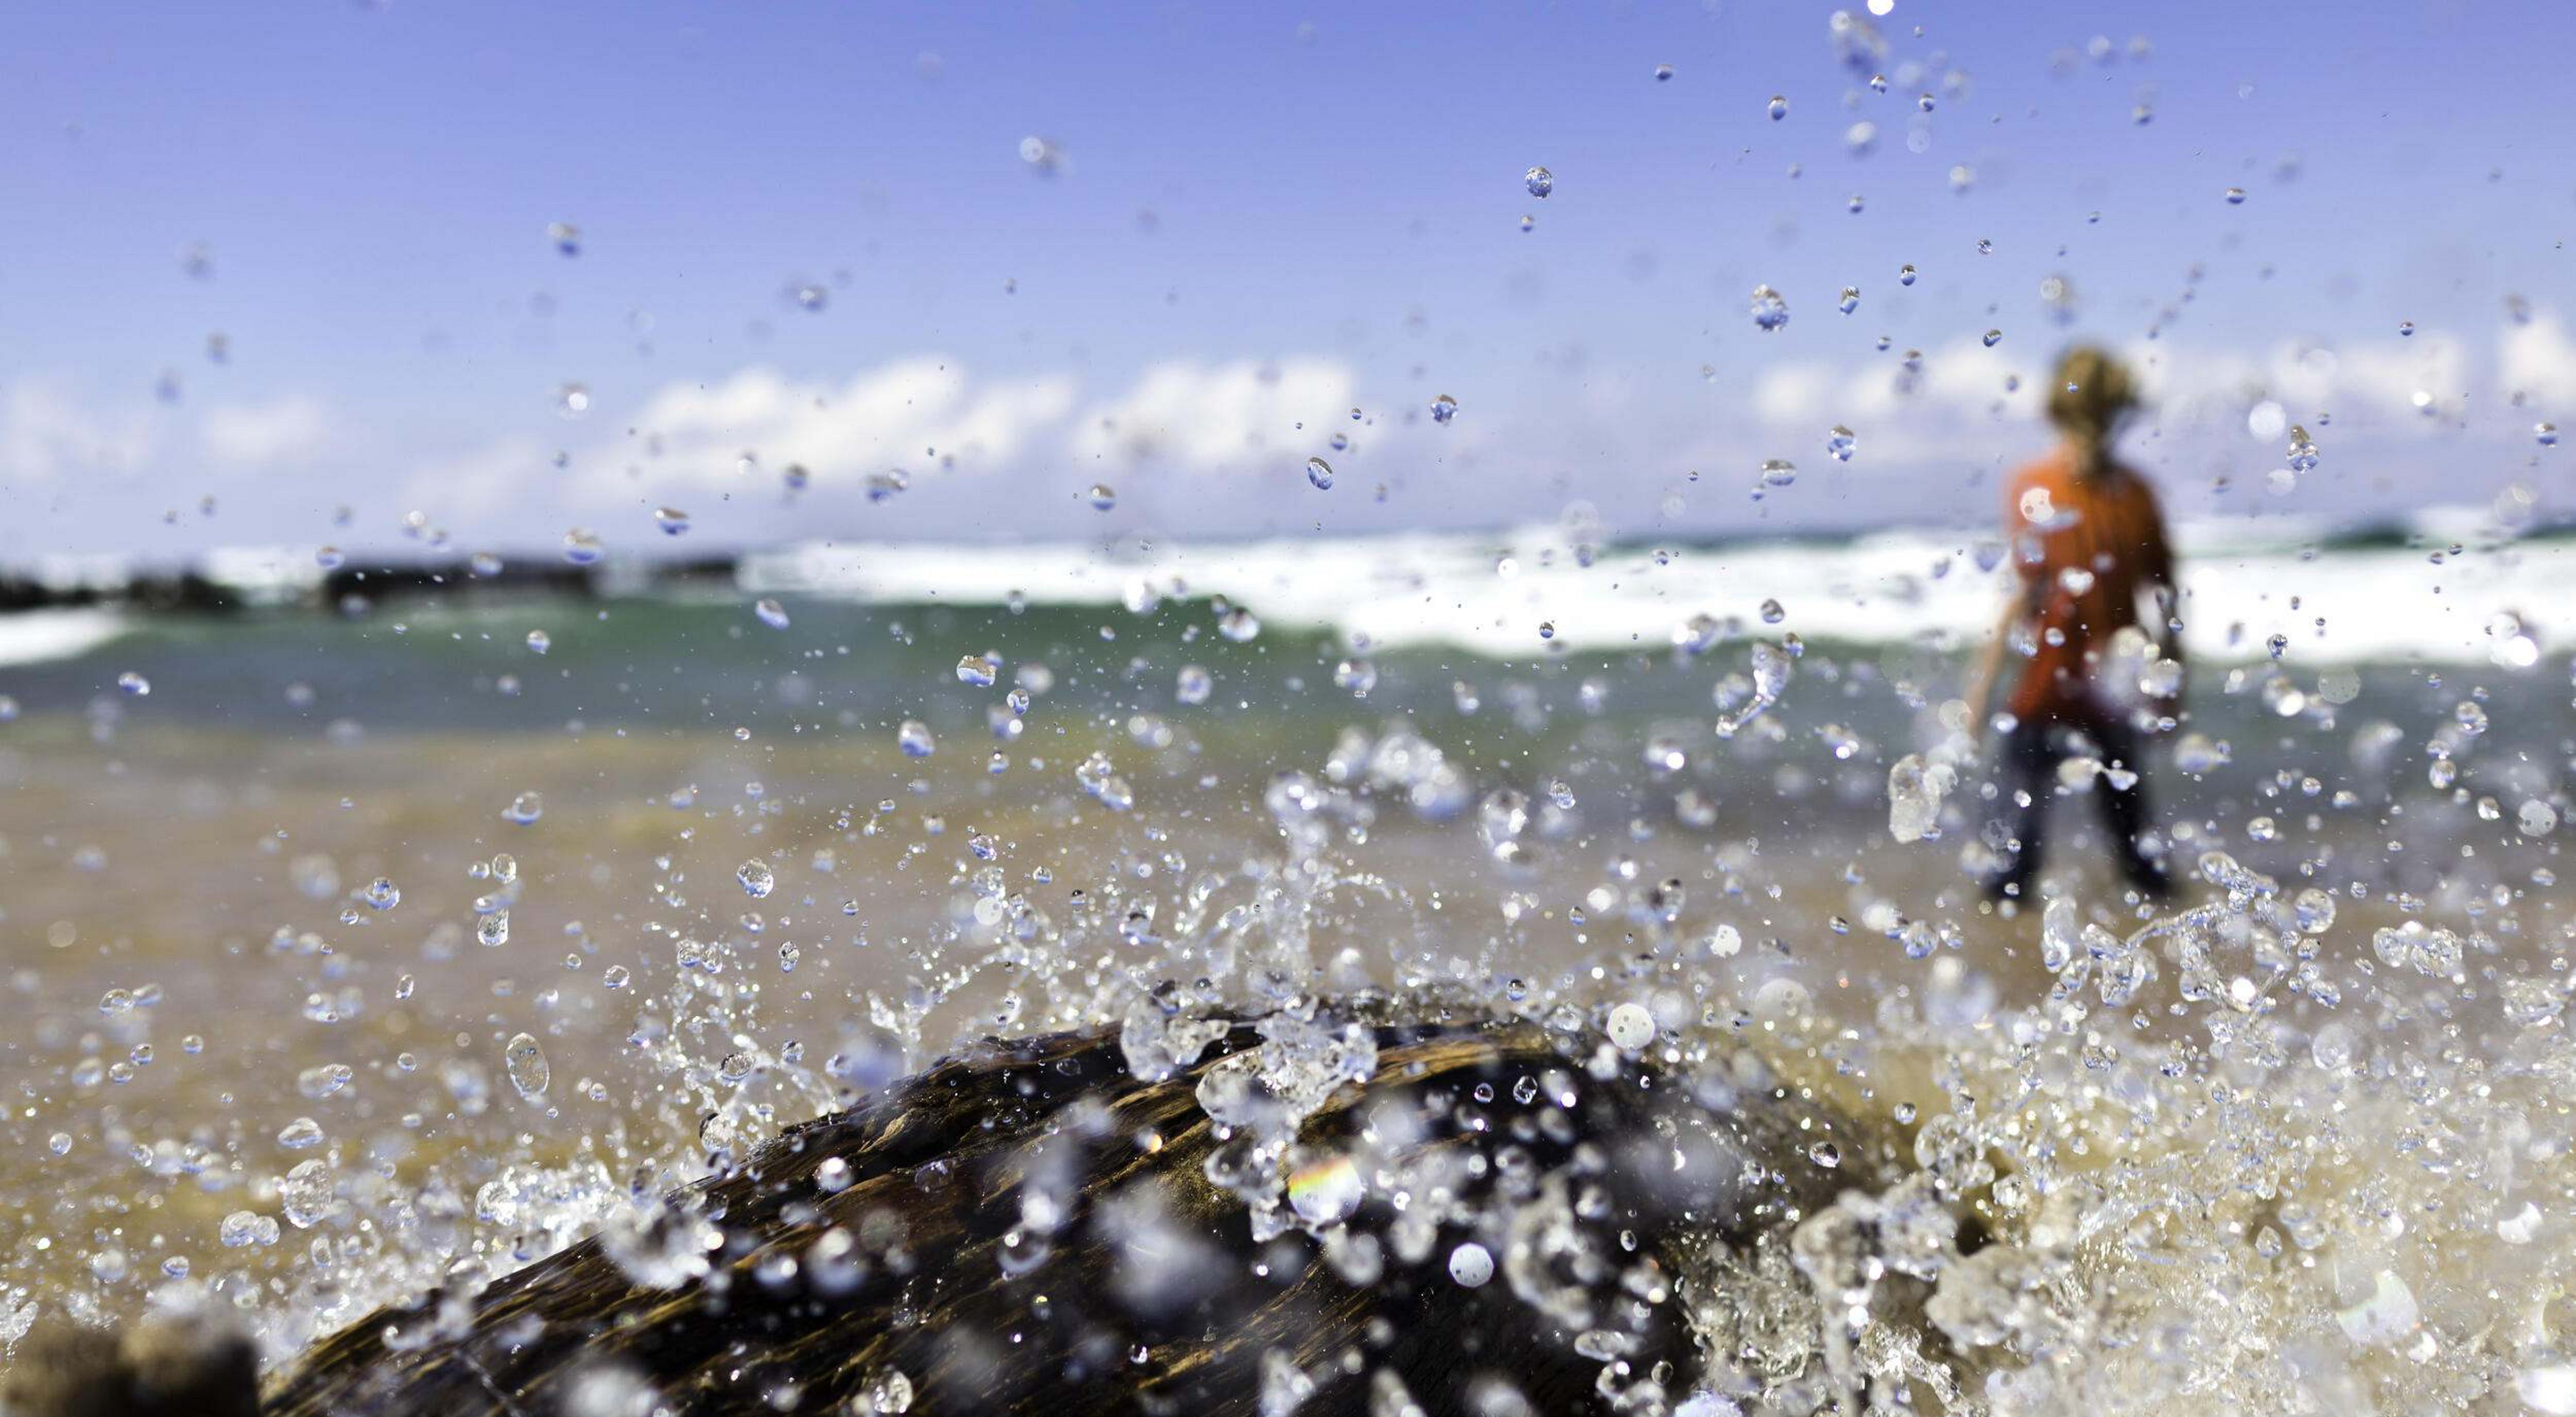 Water splashes over a rock in the foreground of the sandy shore of a lake with a person out of focus in the background. 